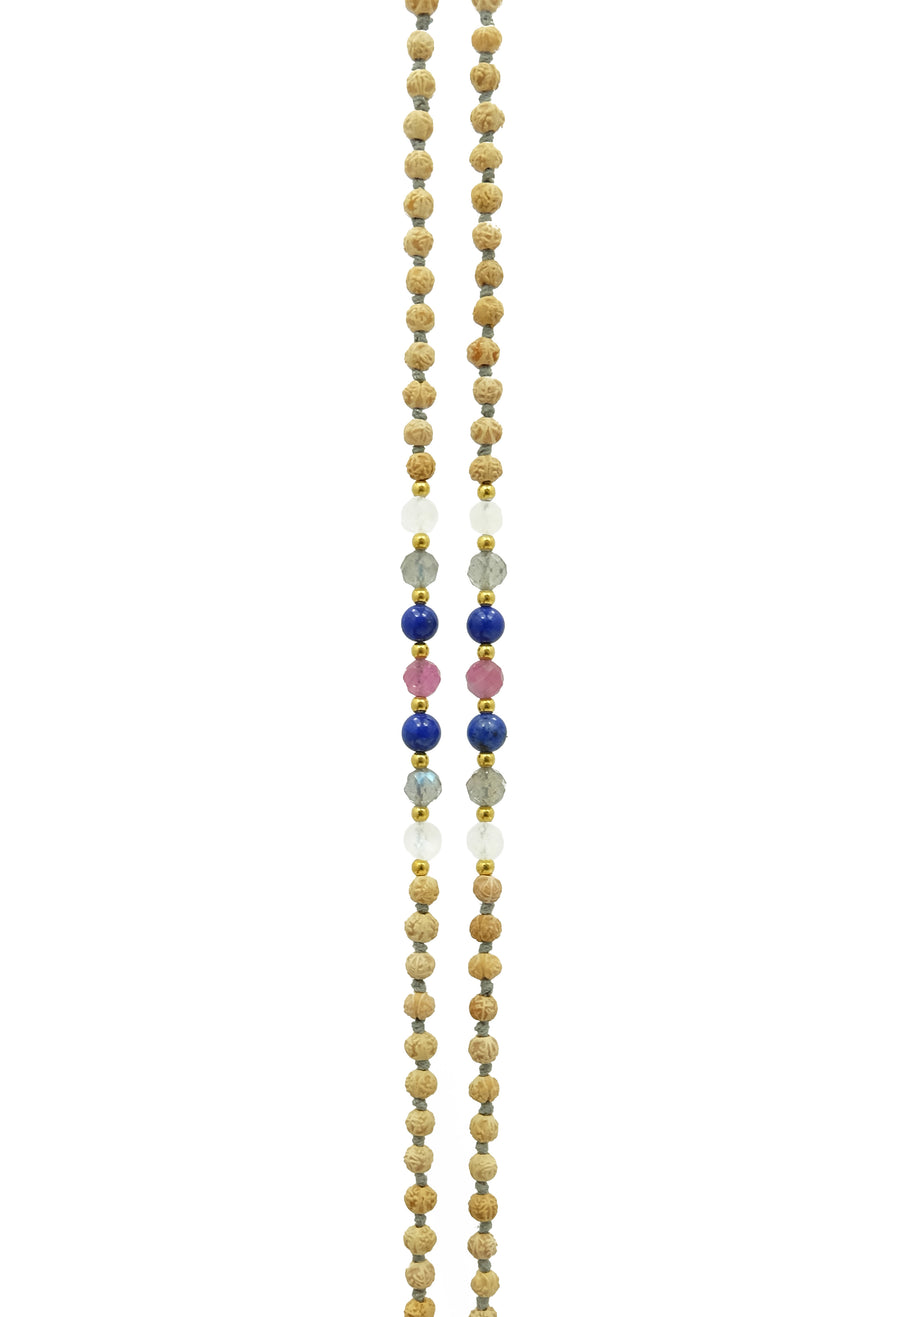 Image: Ice Moon Mala - Cooling Gemstones | Moonstone, Labradorite, Tourmaline | Rudrani Seeds | 22k Gold Accents | Lapis Lazuli Pendant. Find balance and tranquility with this serene Ice Moon Mala inspired by Native American tradition. Calm irritable moods and perfectionist minds with the cooling, calming nature of moonstone, labradorite, and tourmaline gemstones. Ideal for spiritual seekers and those seeking inner harmony.